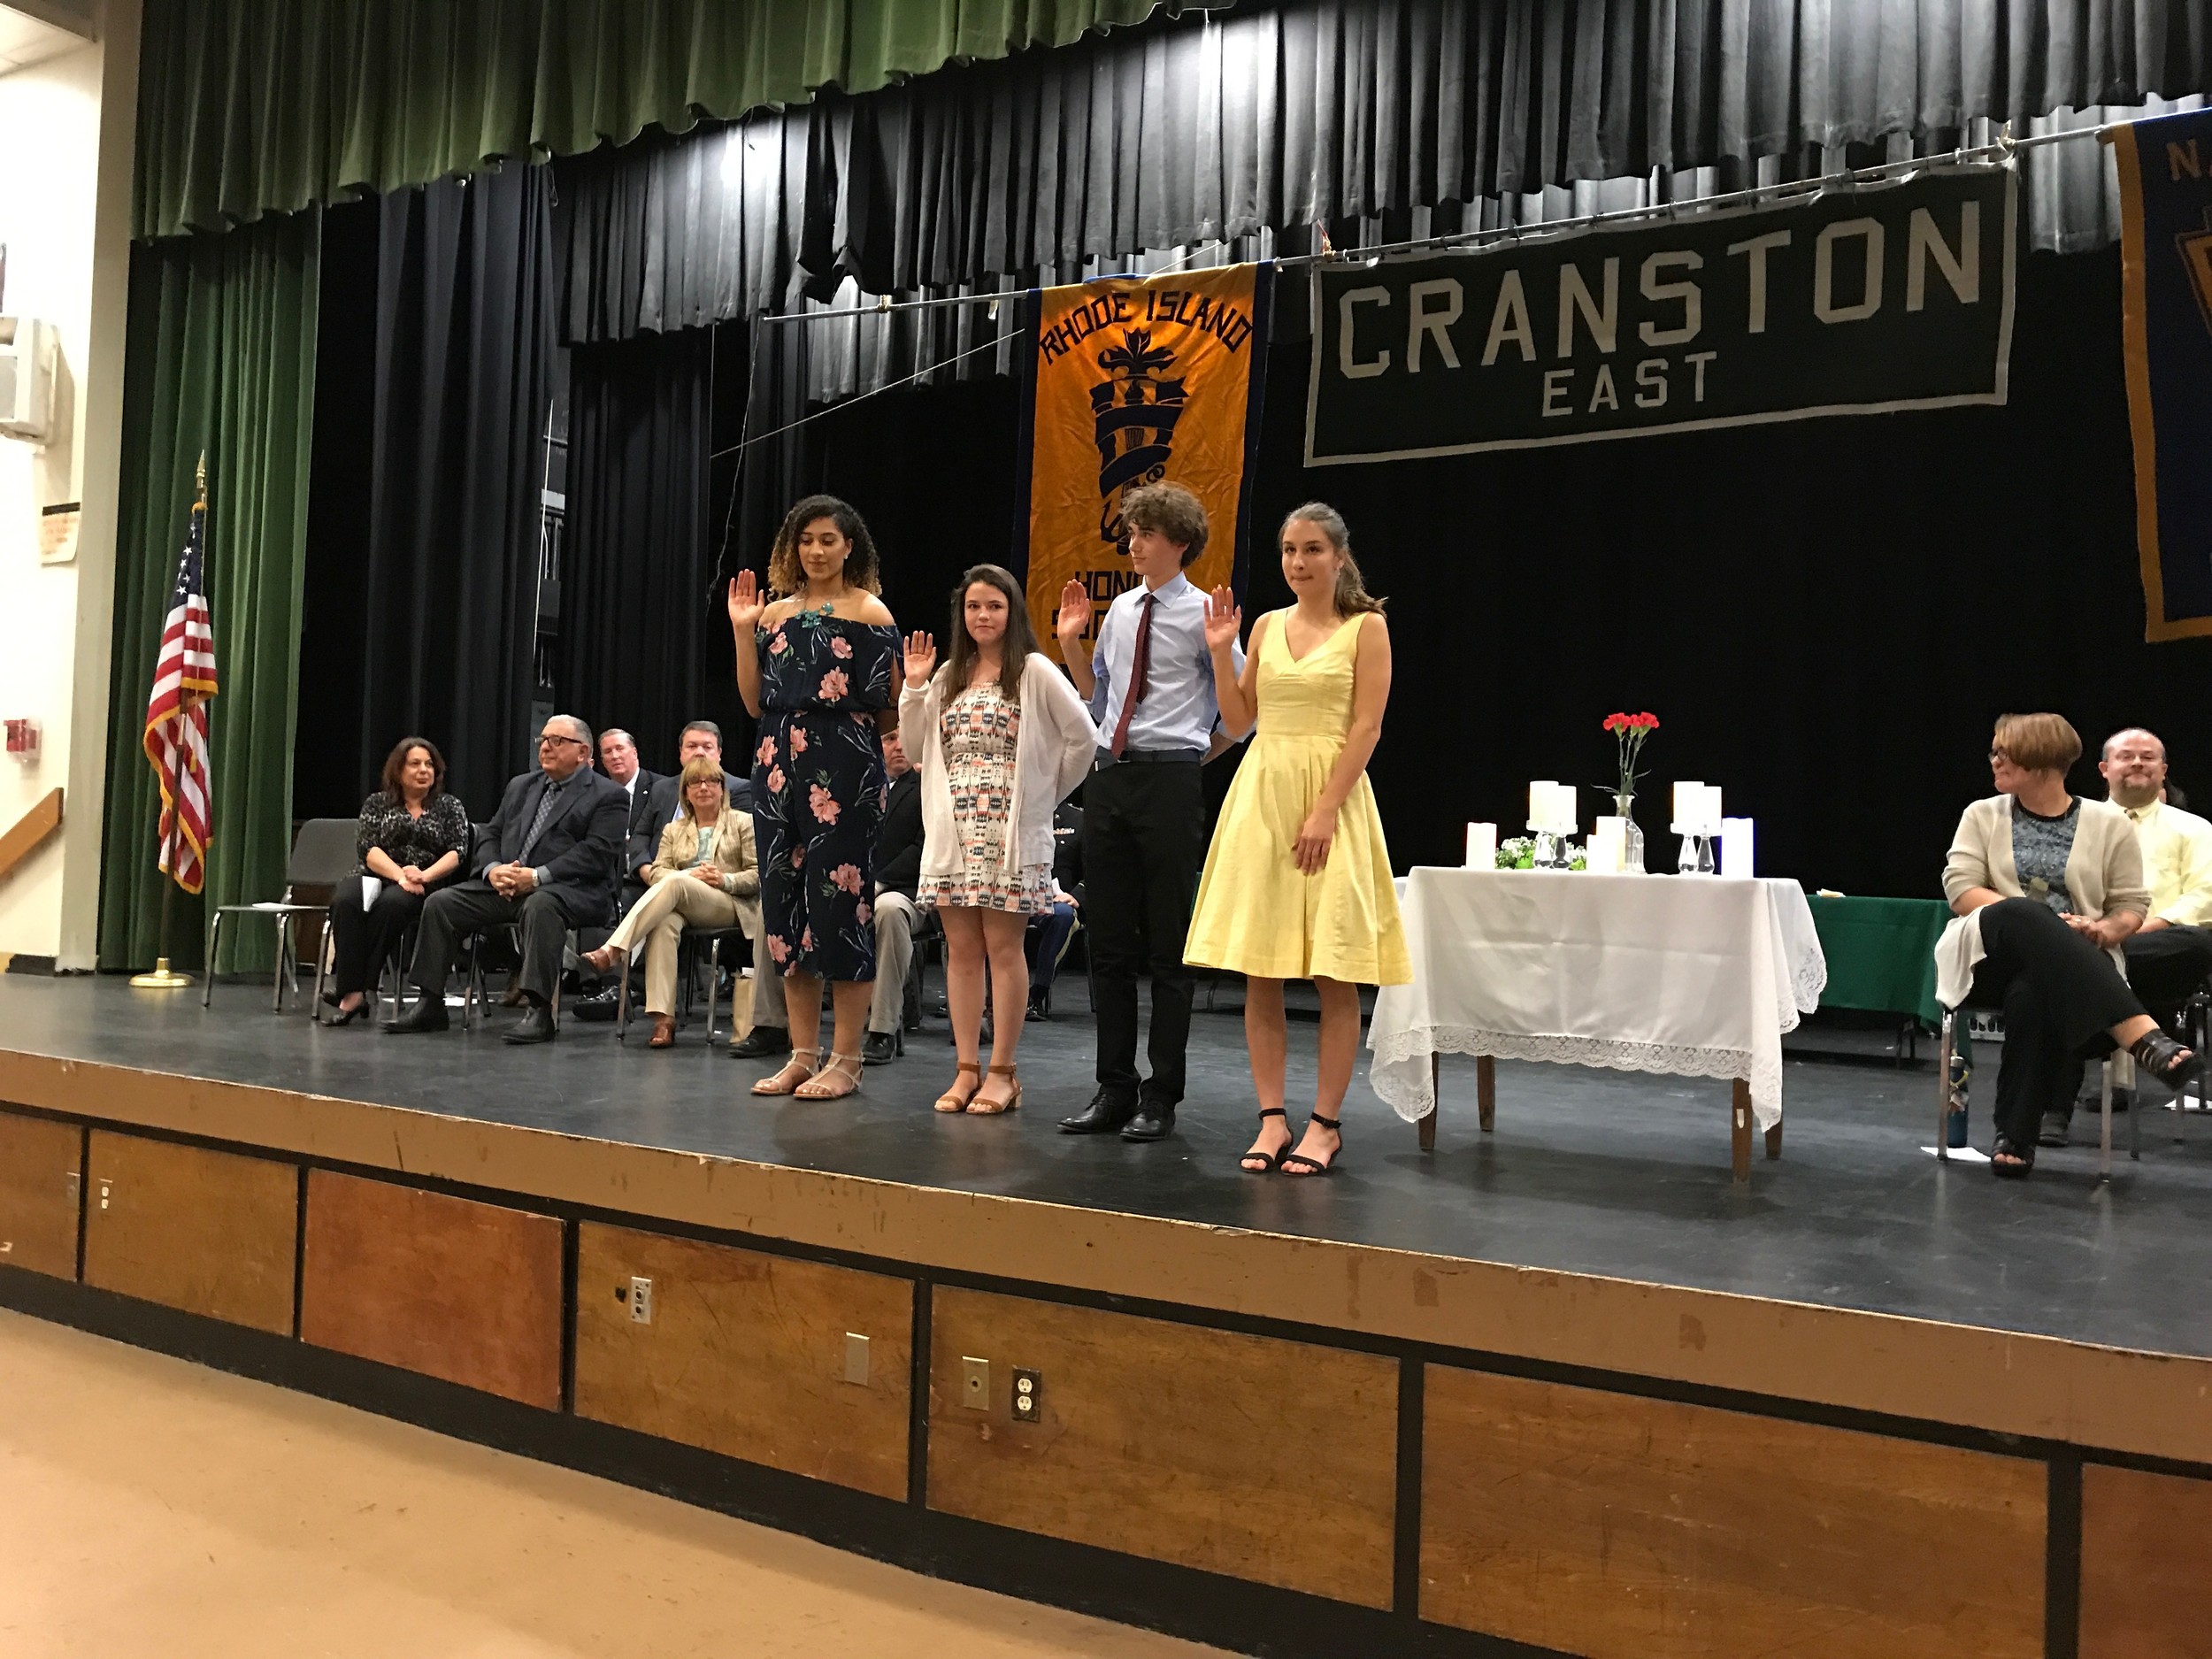 Cranston East inducts newest class into National Honor Society